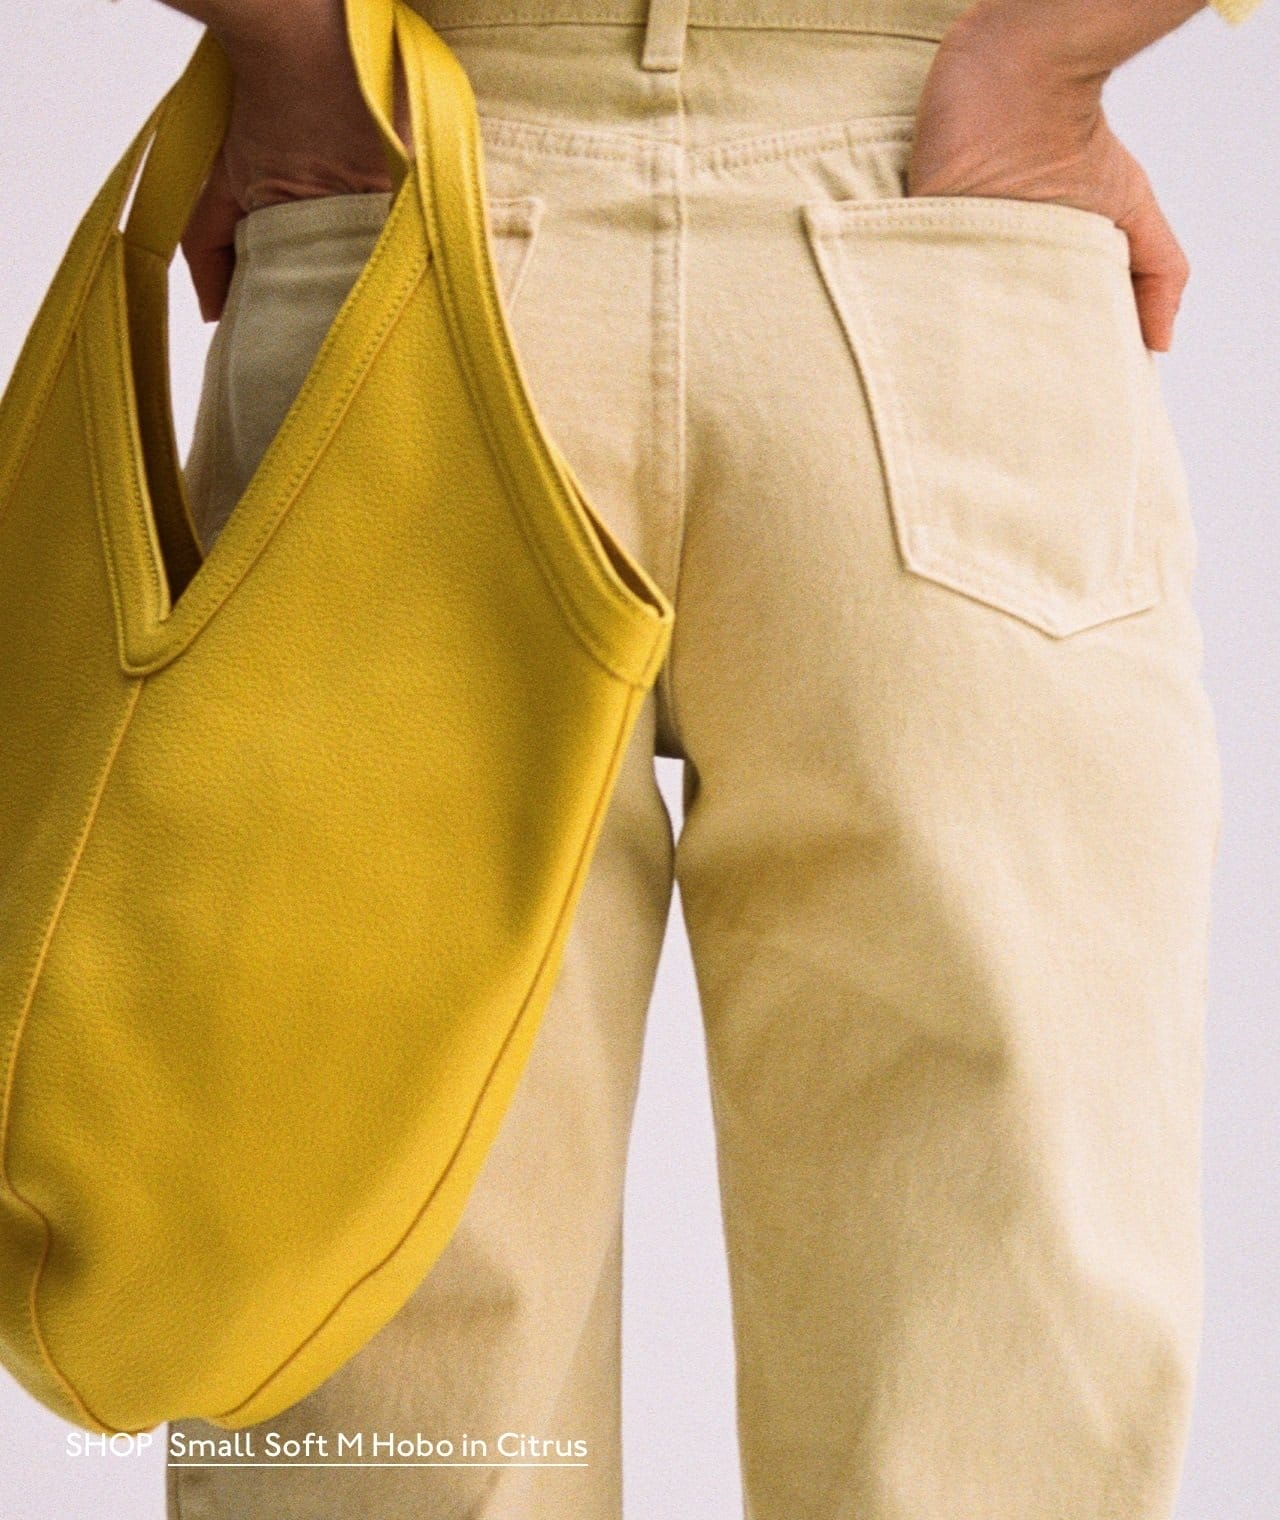 Shop yellows for spring. Pictured: Small Soft M Hobo in Citrus.